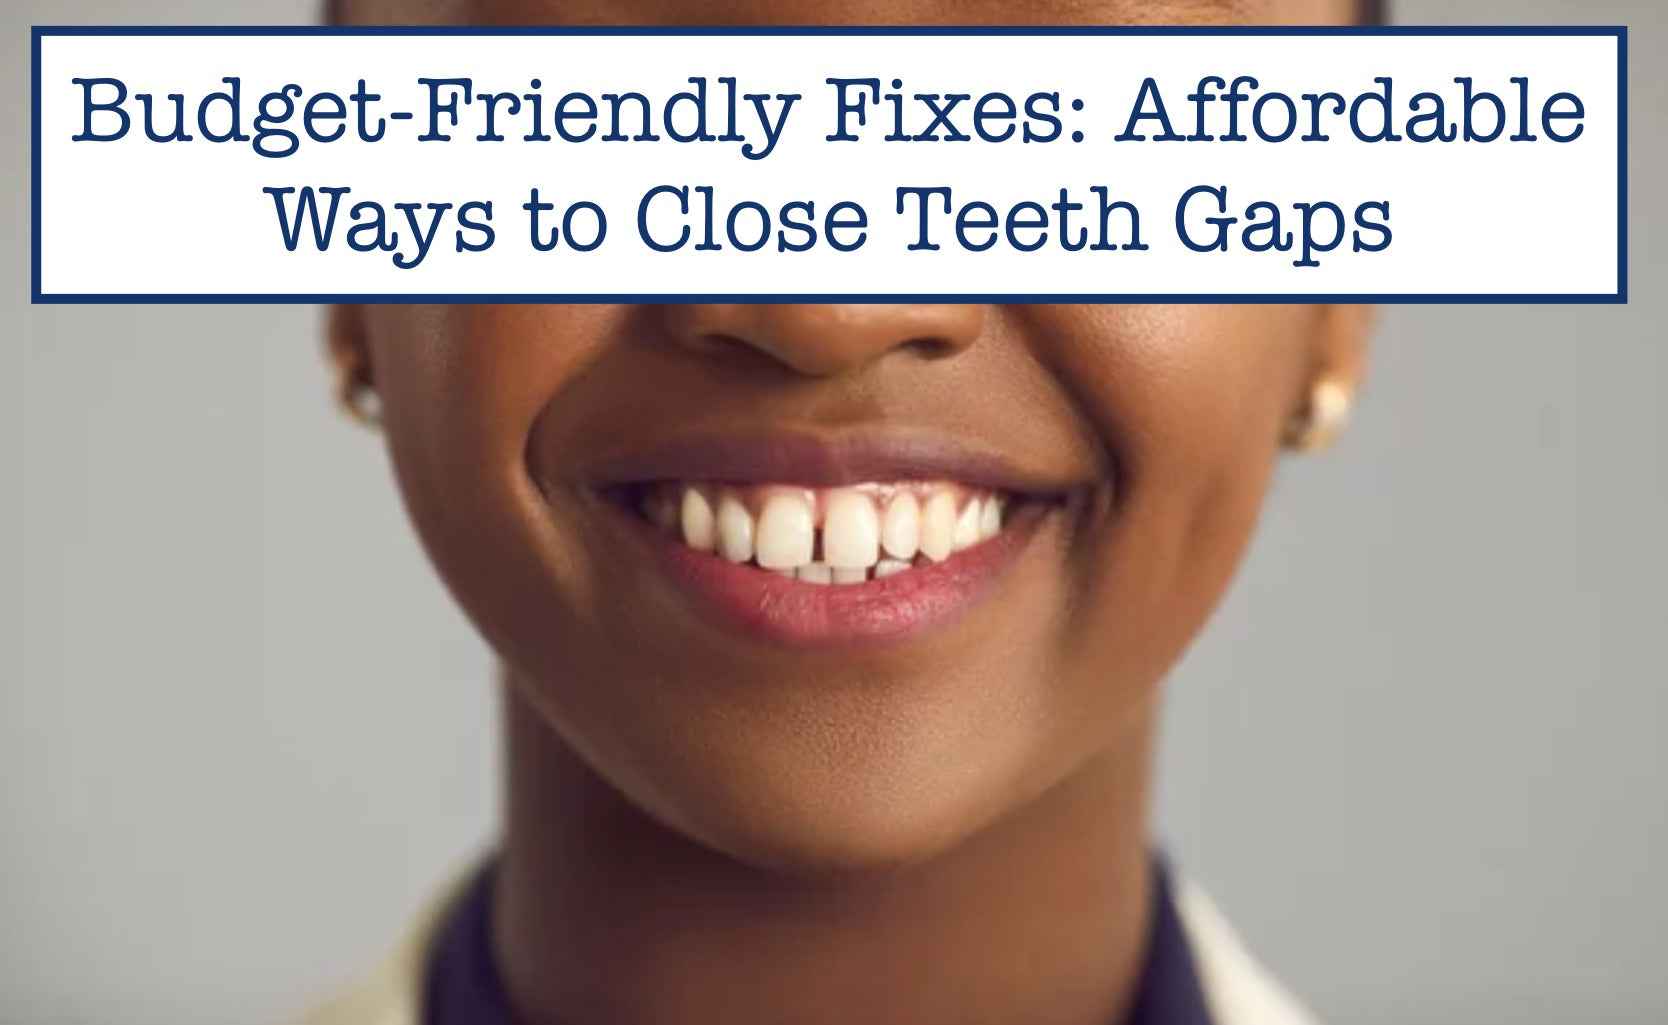 Budget-Friendly Fixes: Affordable Ways to Close Teeth Gaps